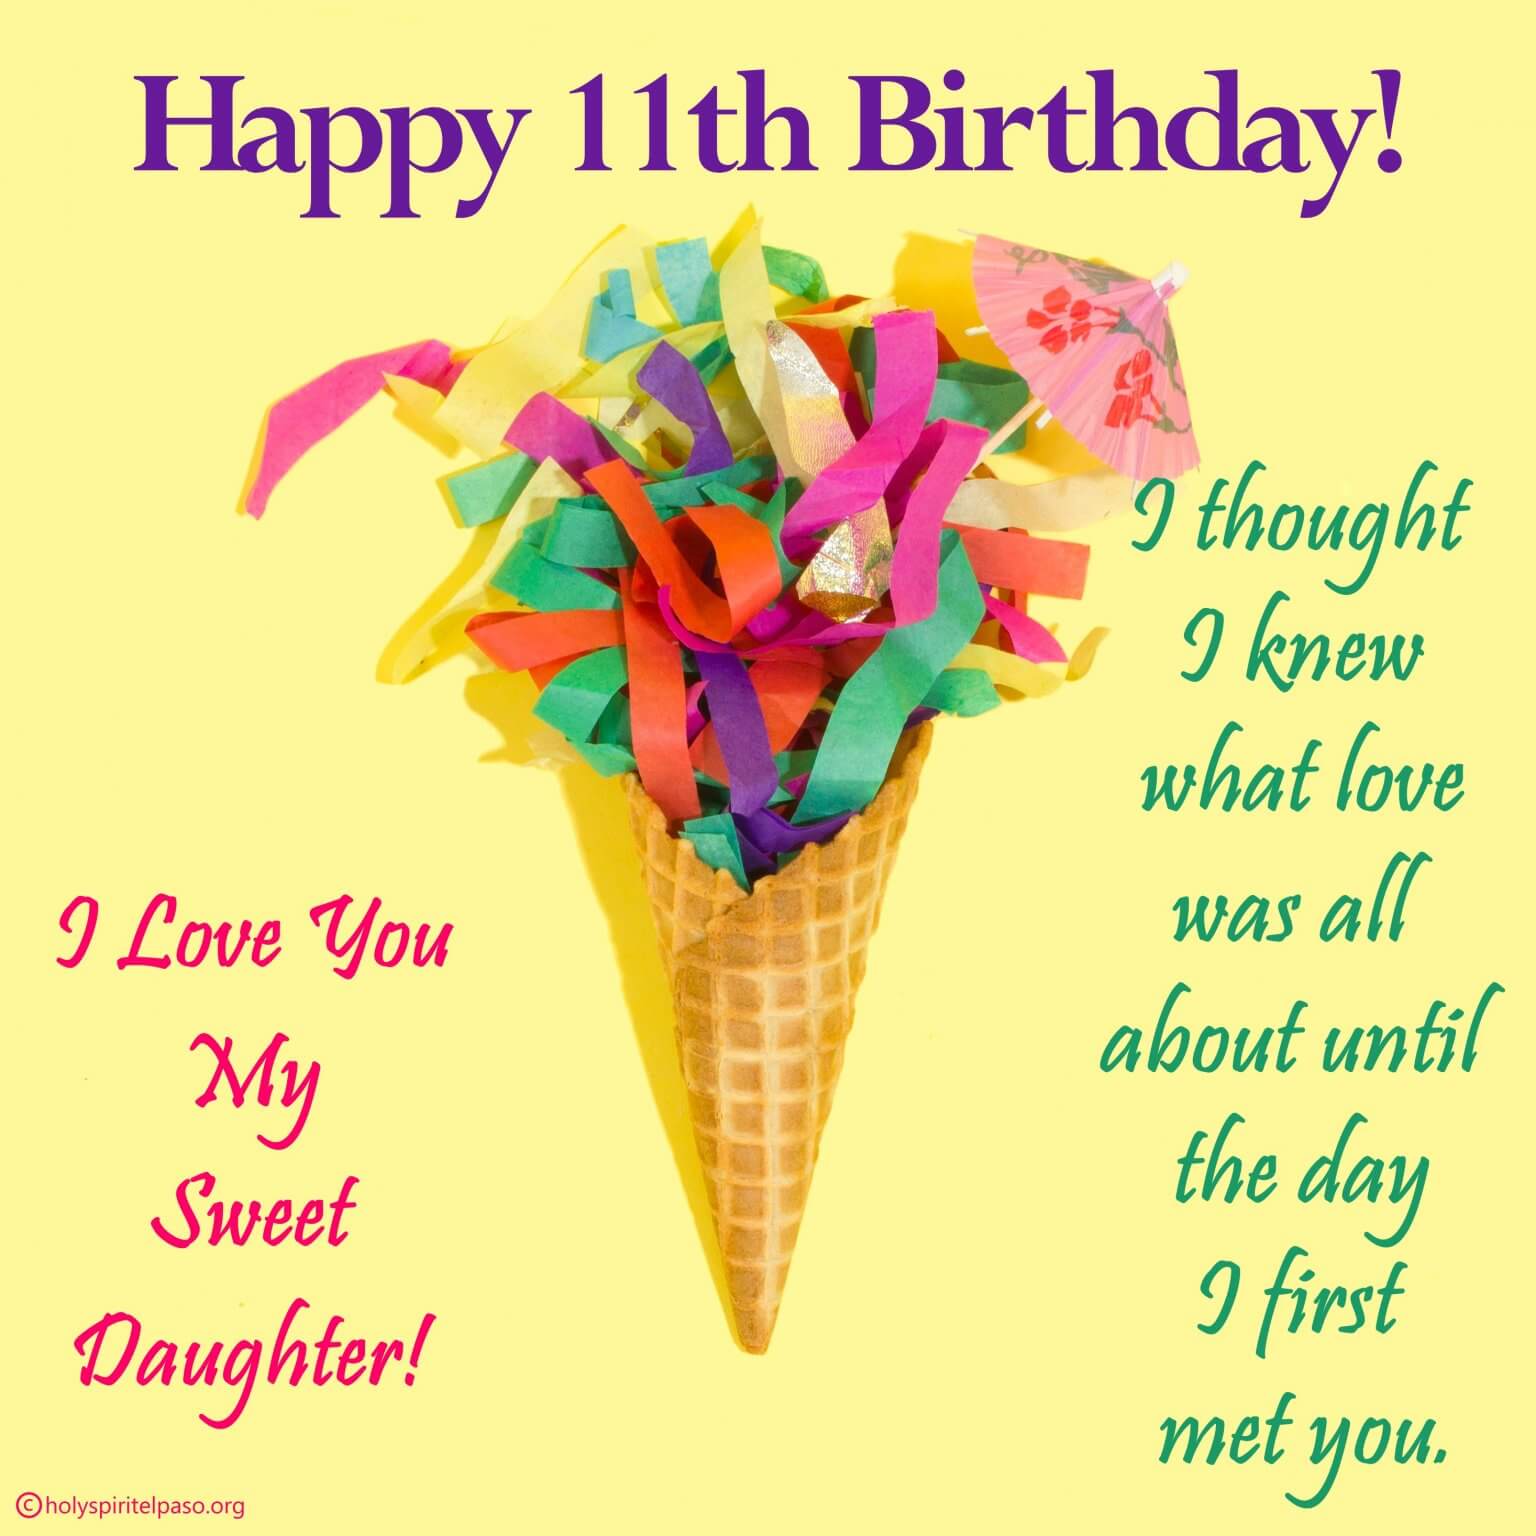 11th-birthday-quotes-happy-11th-birthday-wishes-sayings